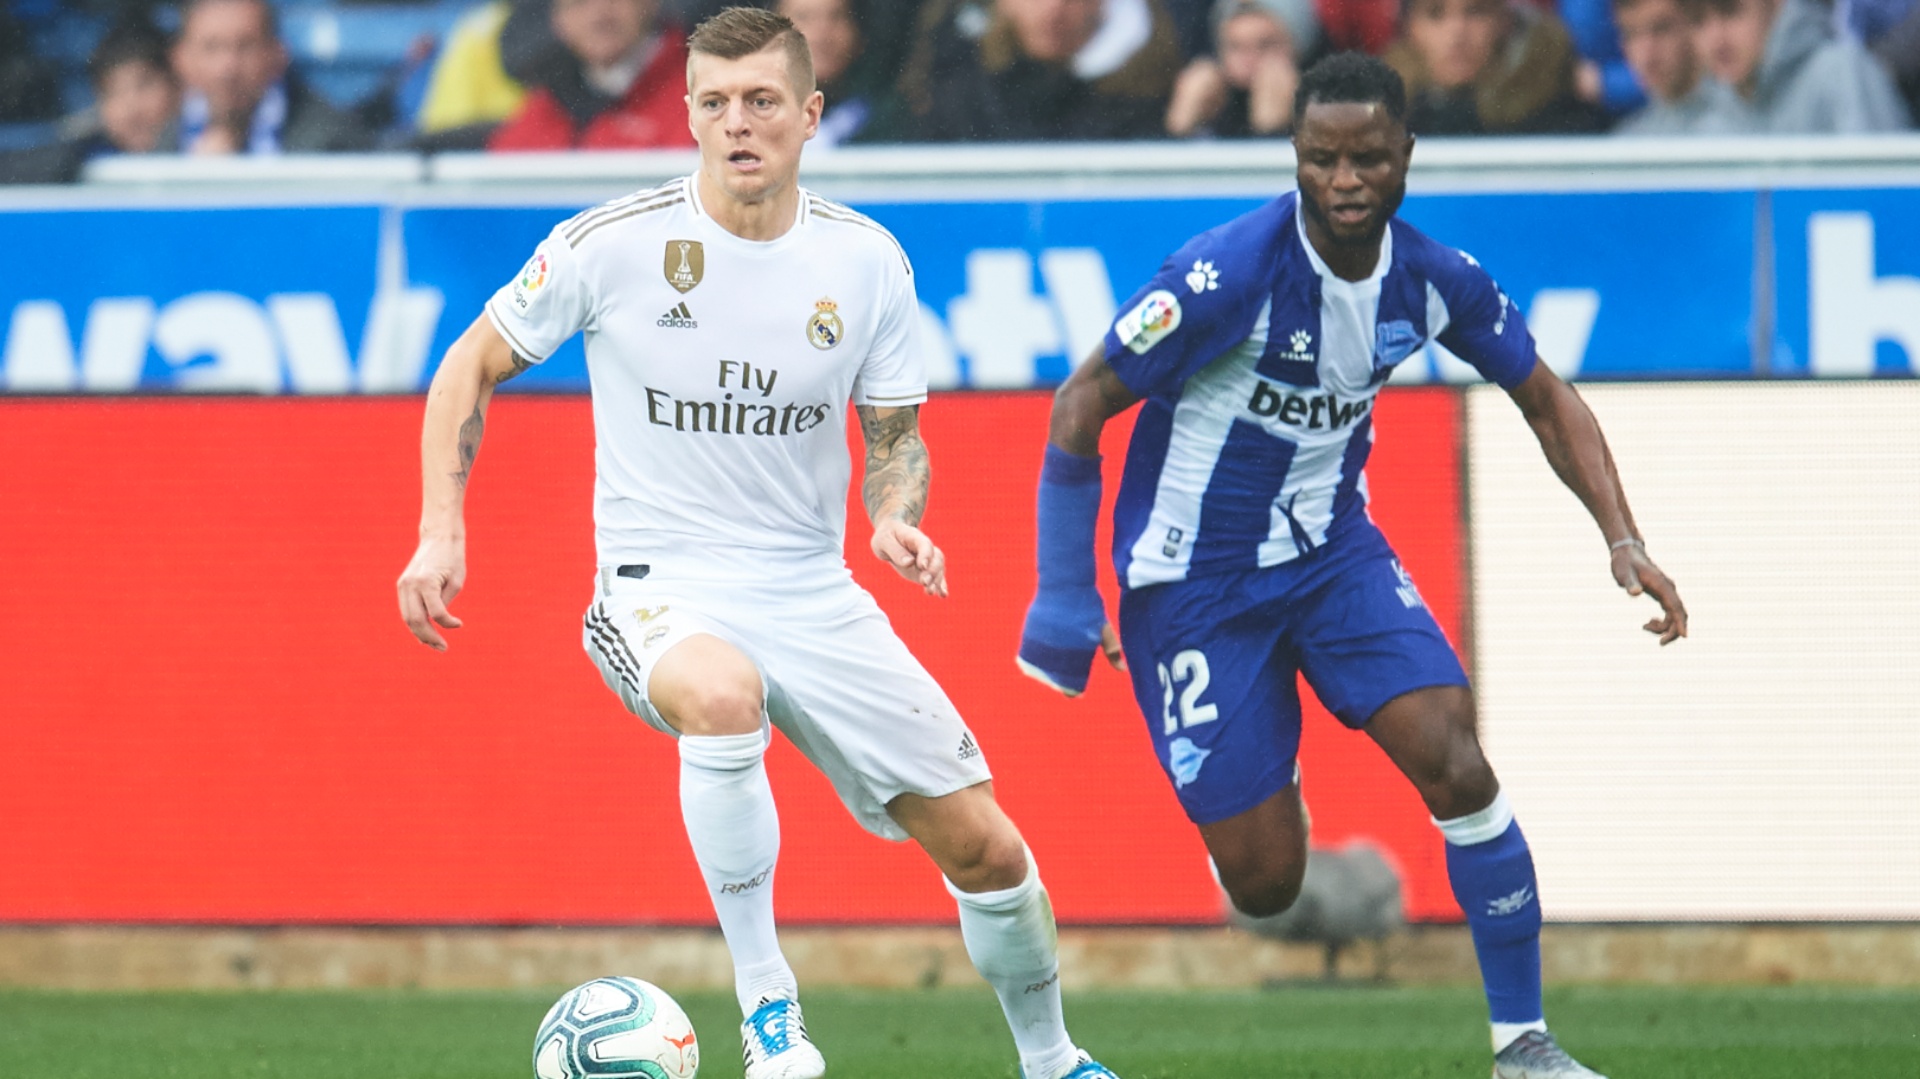 Real Madrid victorious over Mubarak Wakaso's Alaves